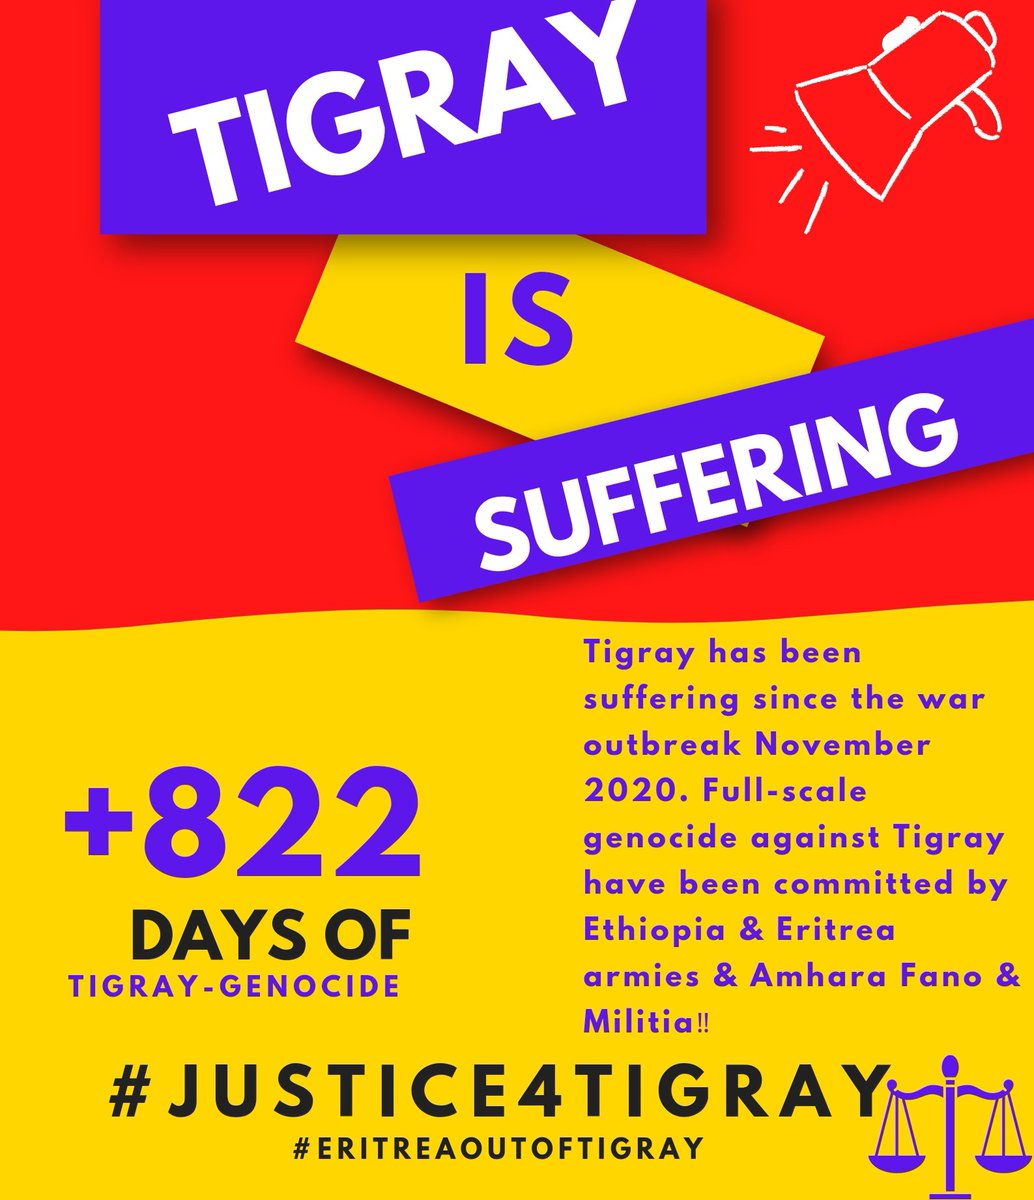 RT @Tembieneyti14: Tigray has been suffering since the war outbreak November 2020. Full-scale genocide against Tigray have been committed by 🇪🇹|n& 
🇪🇷|n armies &Amhara Fano& Militia.
📌+818K civilians died & 7M ppl are left to starve. 
#DeclareTigrayF…